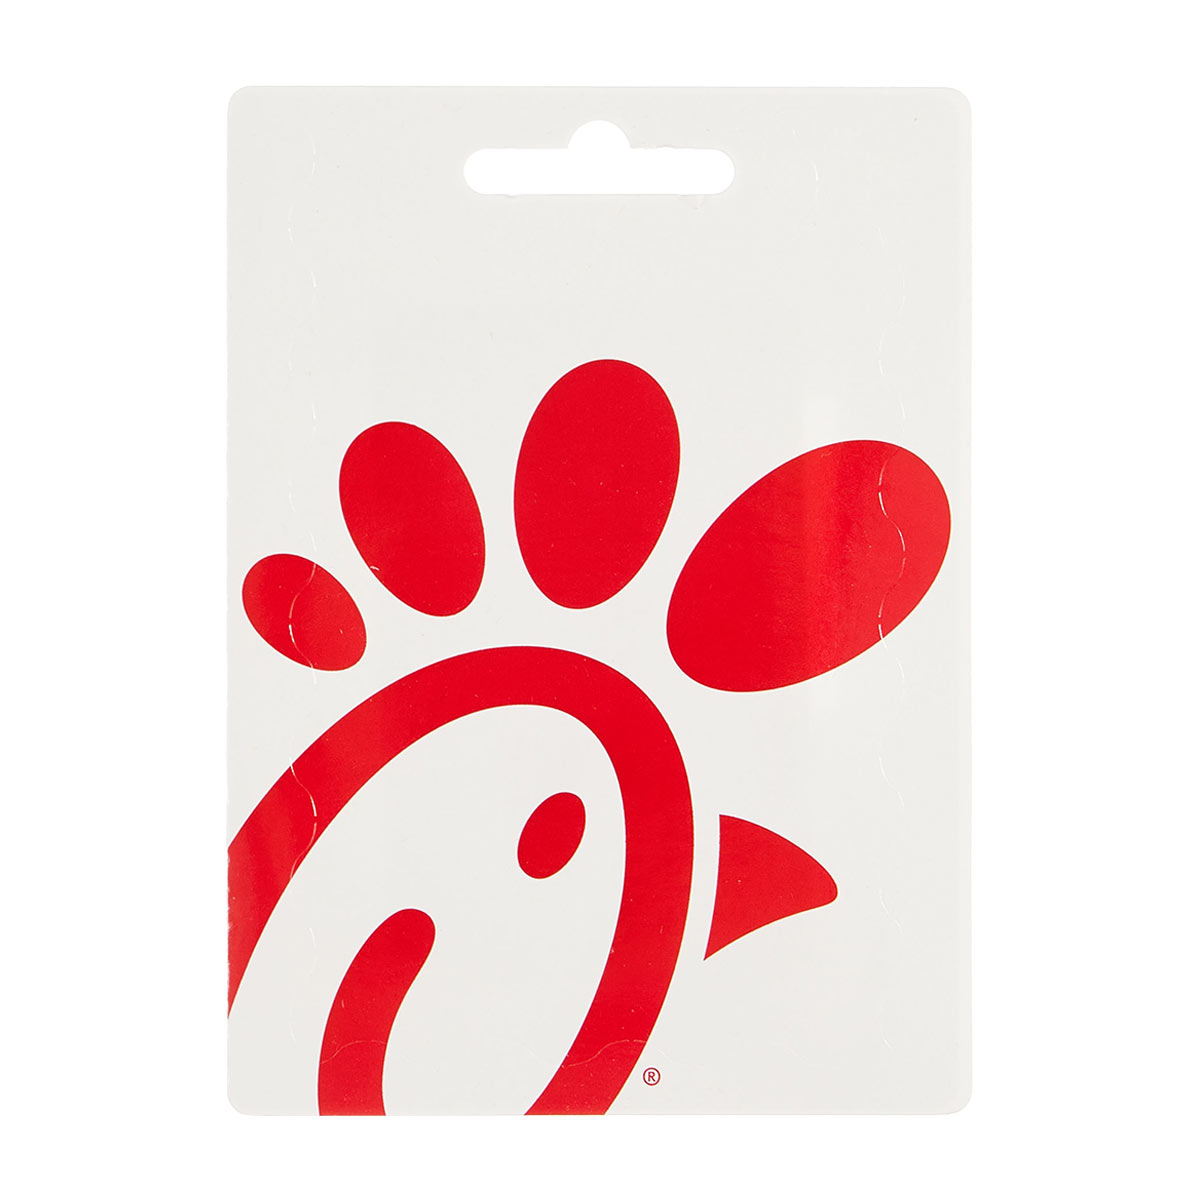 chick-fil-a-gift-card